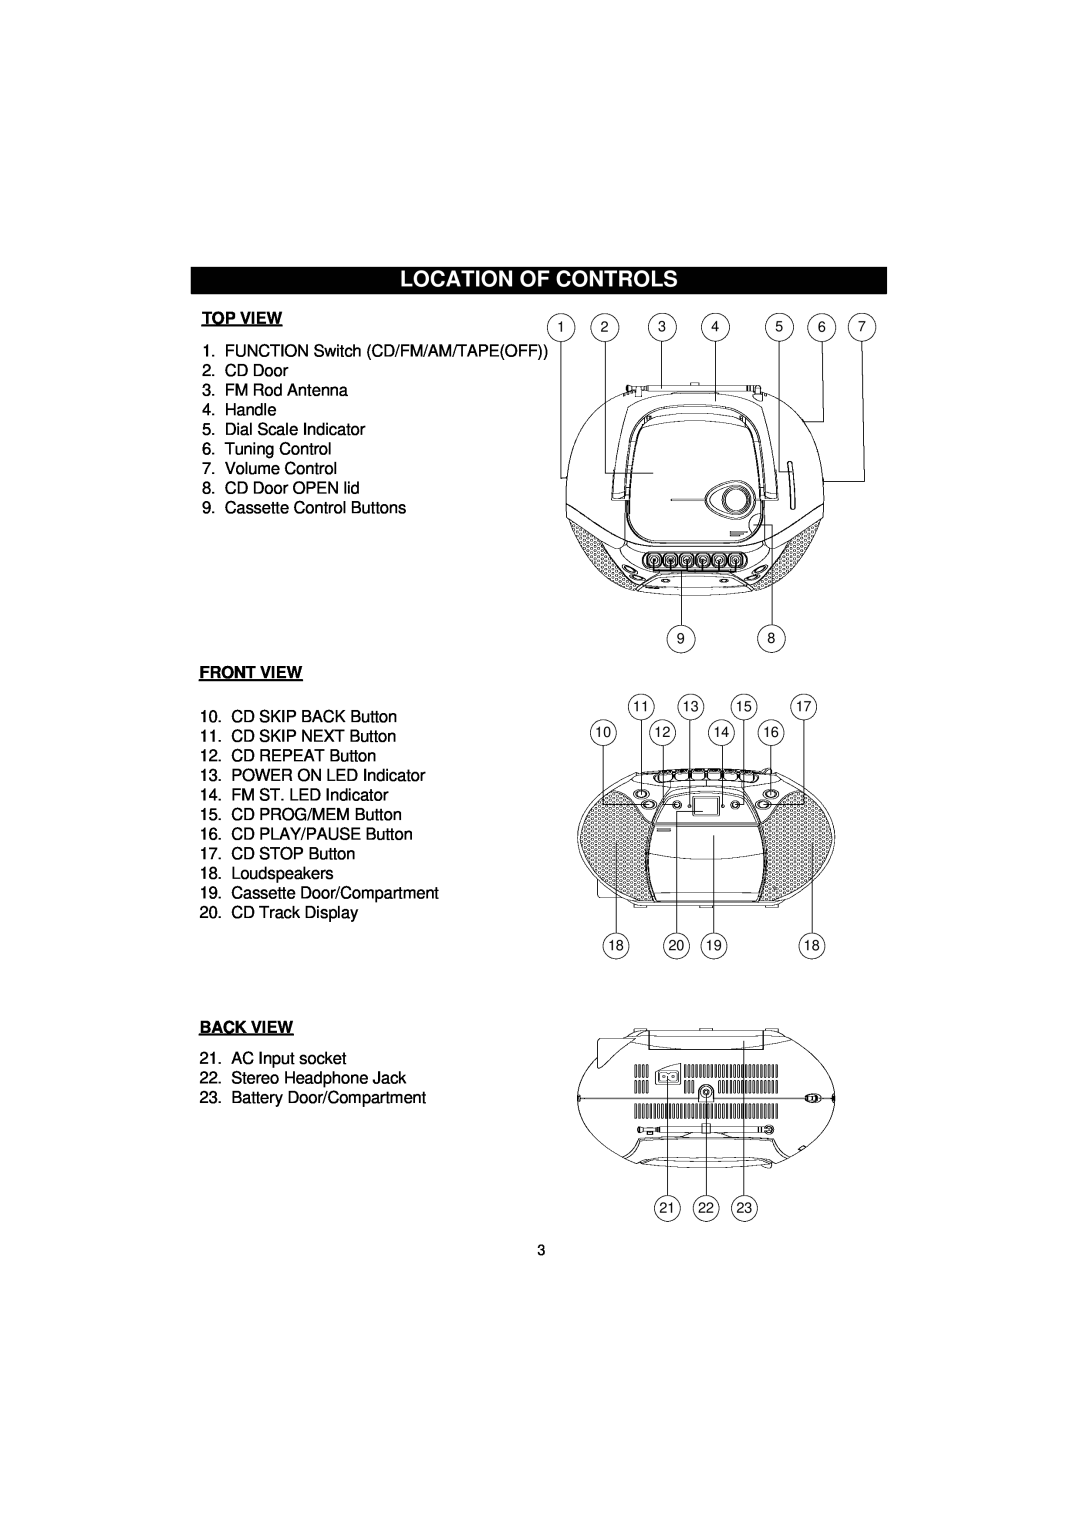 The Singing Machine SMB-635 instruction manual Location Of Controls, Top View, Front View, Back View 